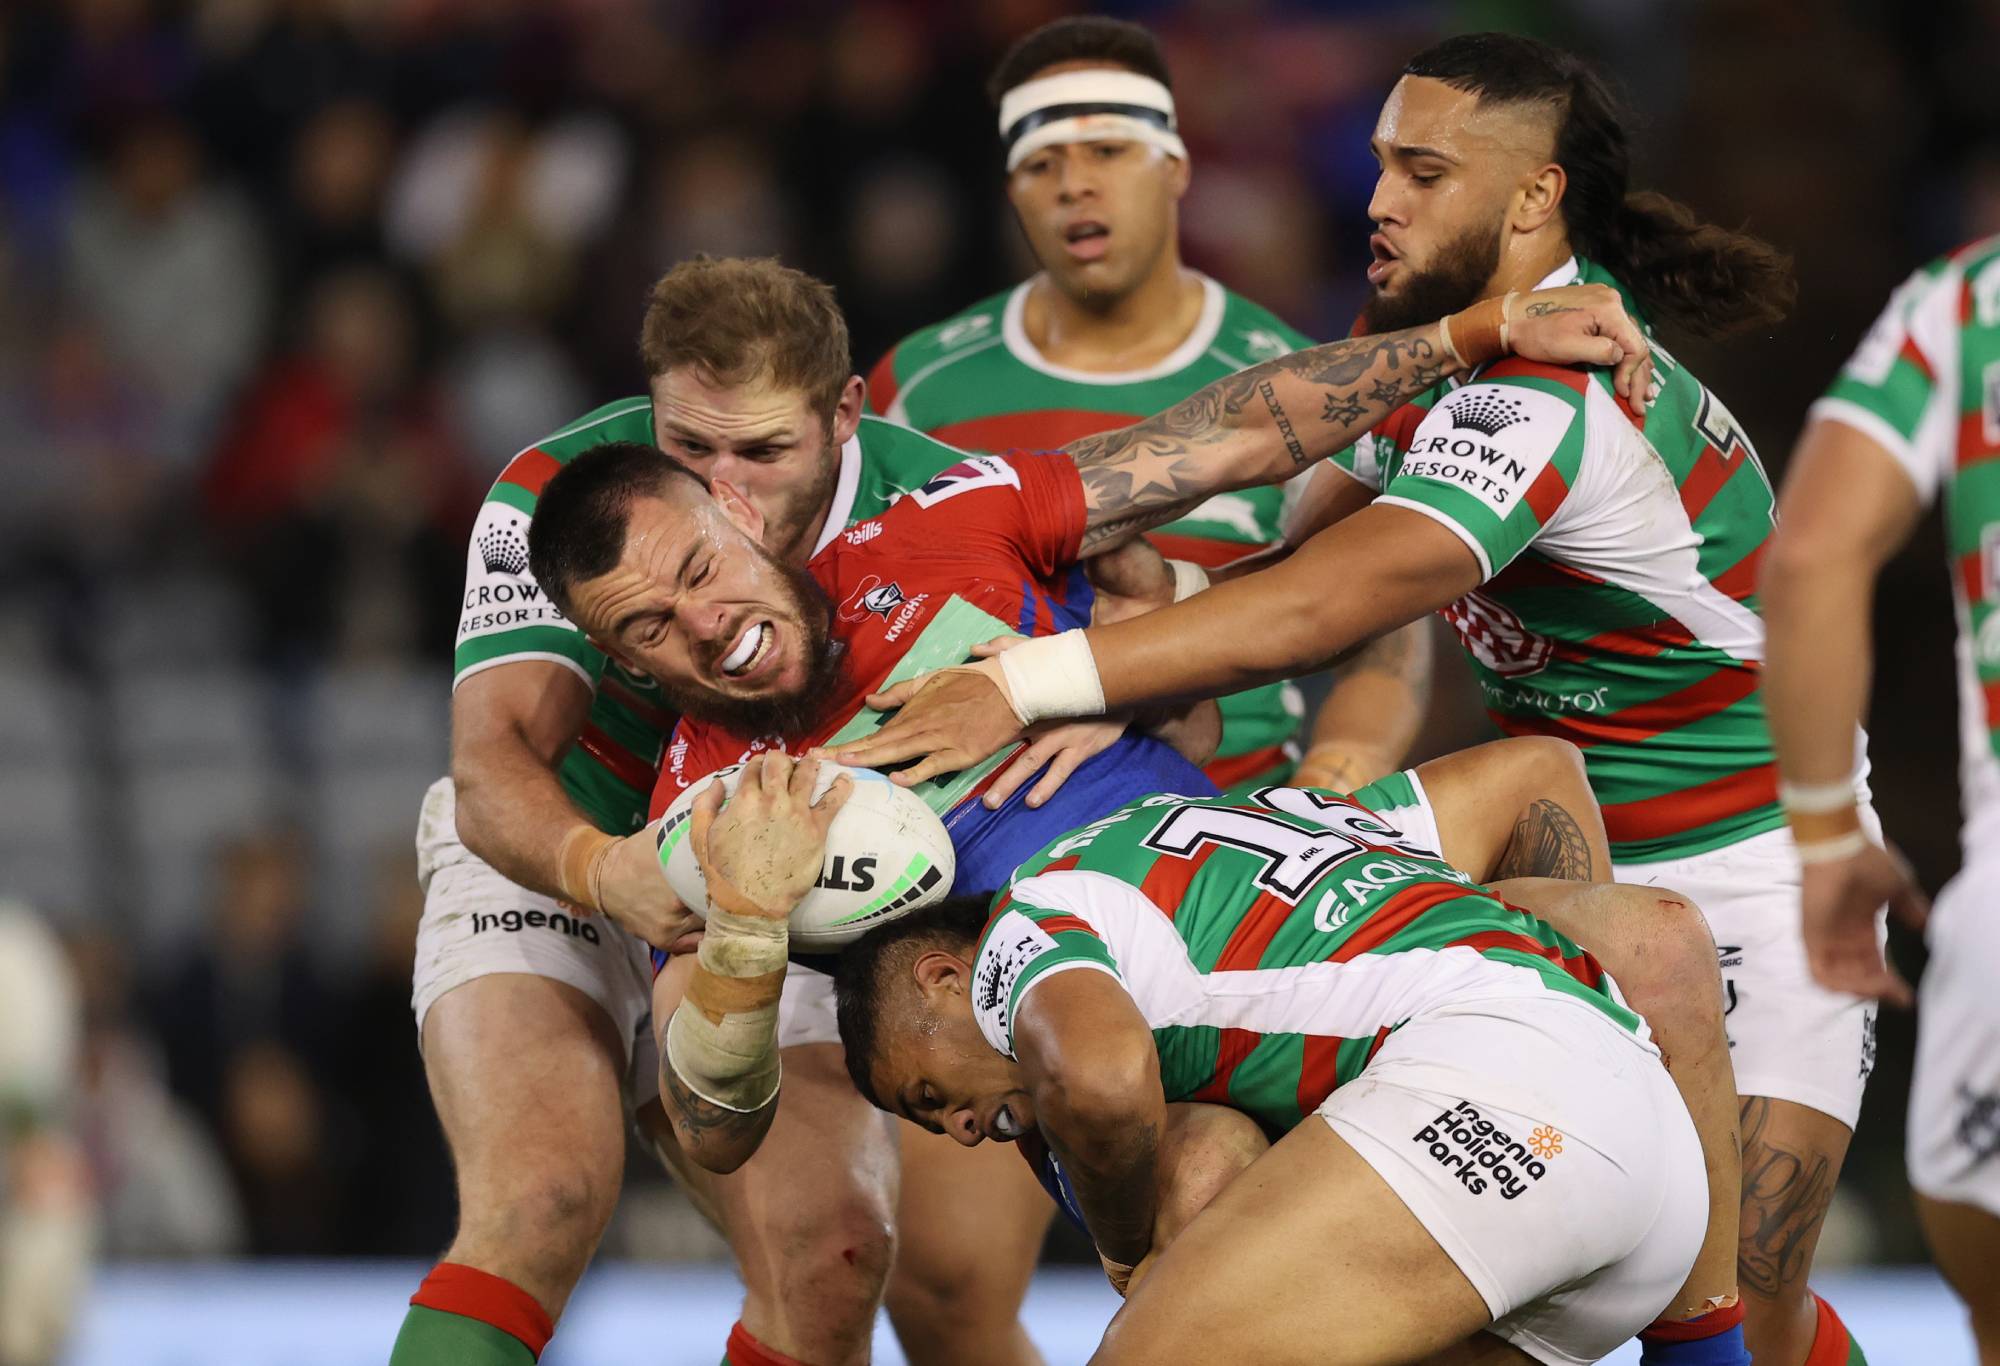 NEWCASTLE, AUSTRALIA - JULY 08: David Klemmer of the Knights is tackled during the round 17 NRL match between the Newcastle Knights and the South Sydney Rabbitohs at McDonald Jones Stadium, on July 08, 2022, in Newcastle, Australia. (Photo by Ashley Feder/Getty Images)